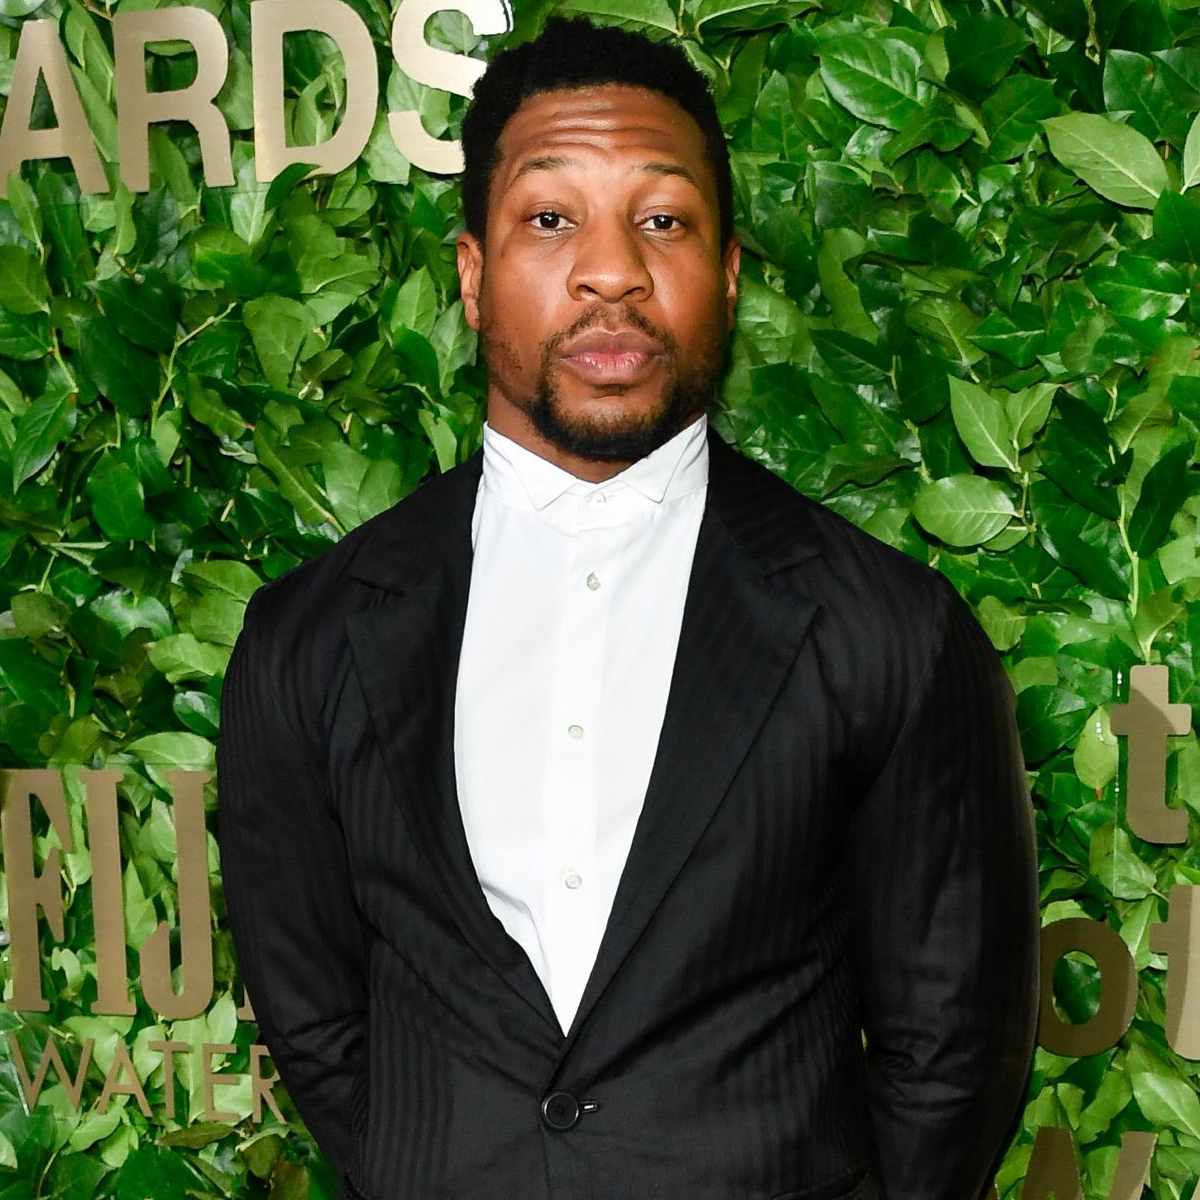 How Jonathan Majors’ Family Really Feels About His Shirtless Photos